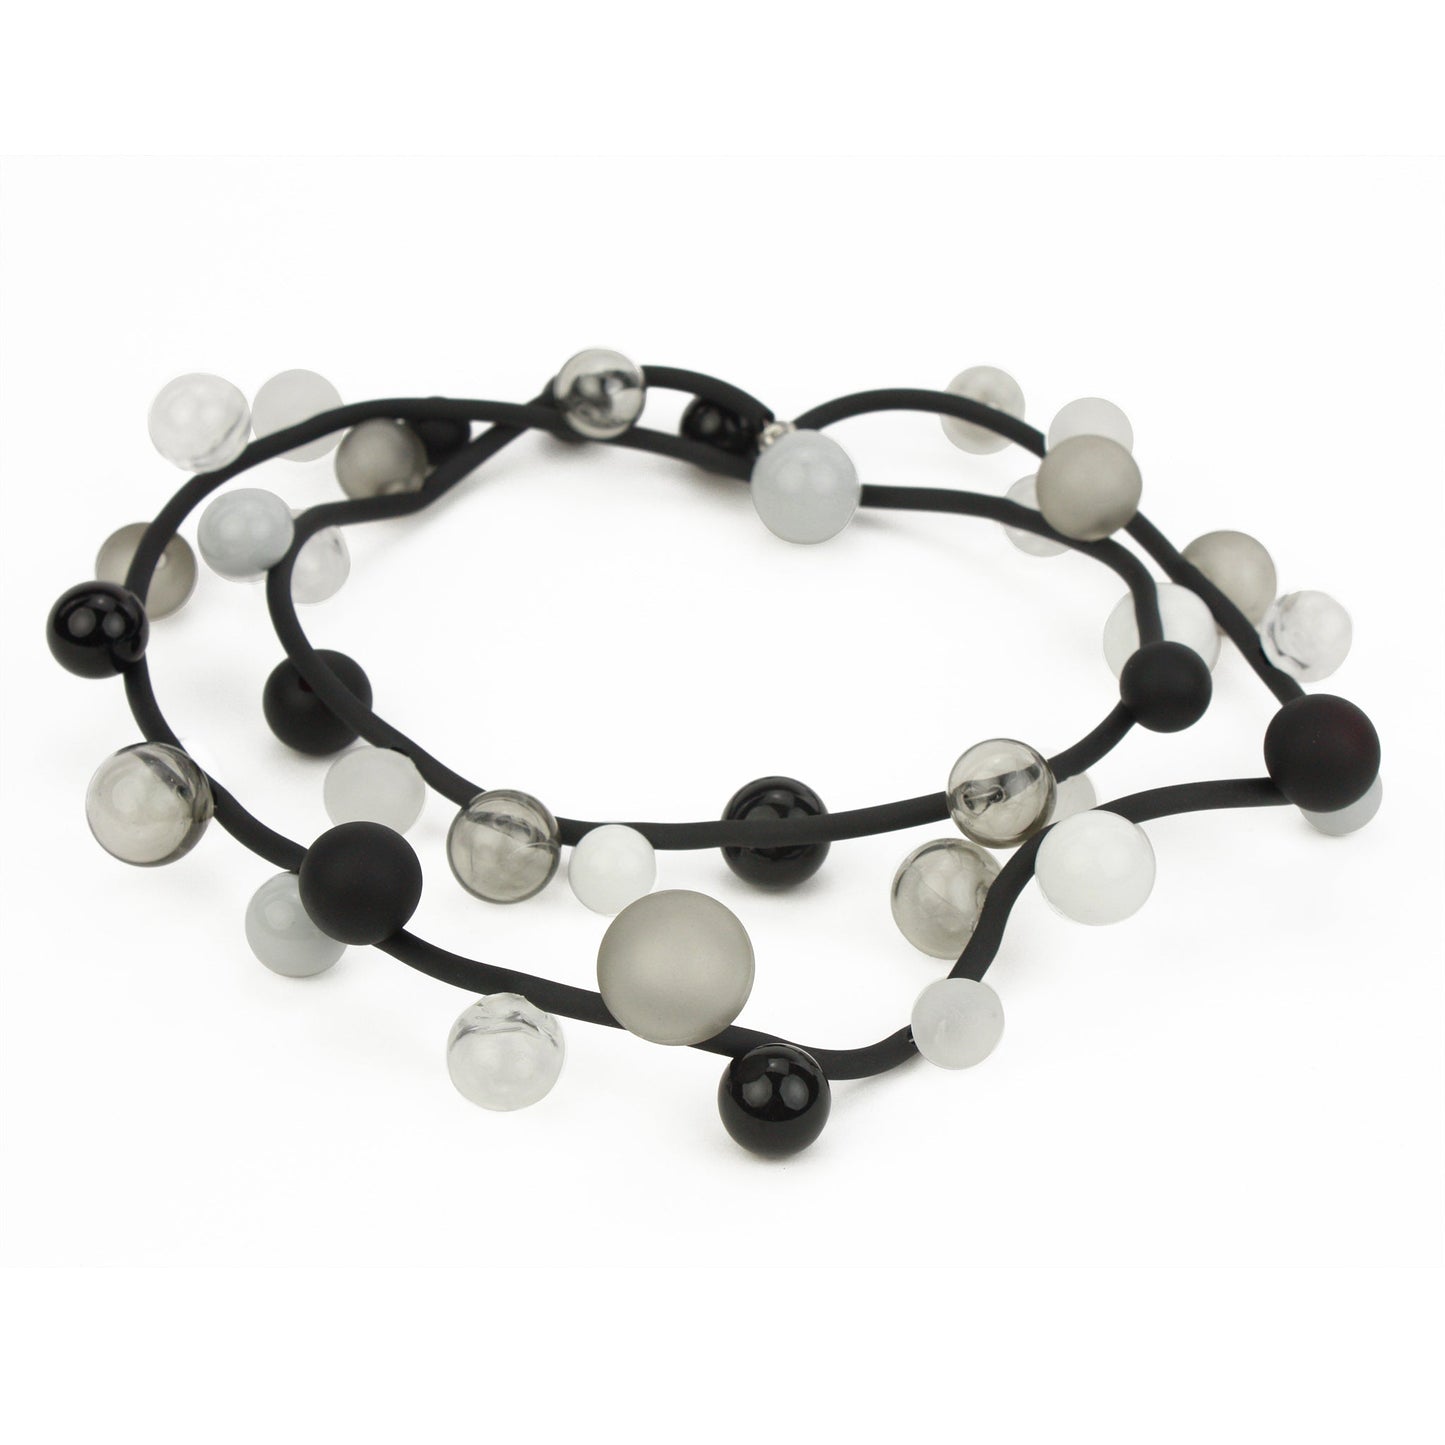 Bolla Necklace Long -Black, white and grey